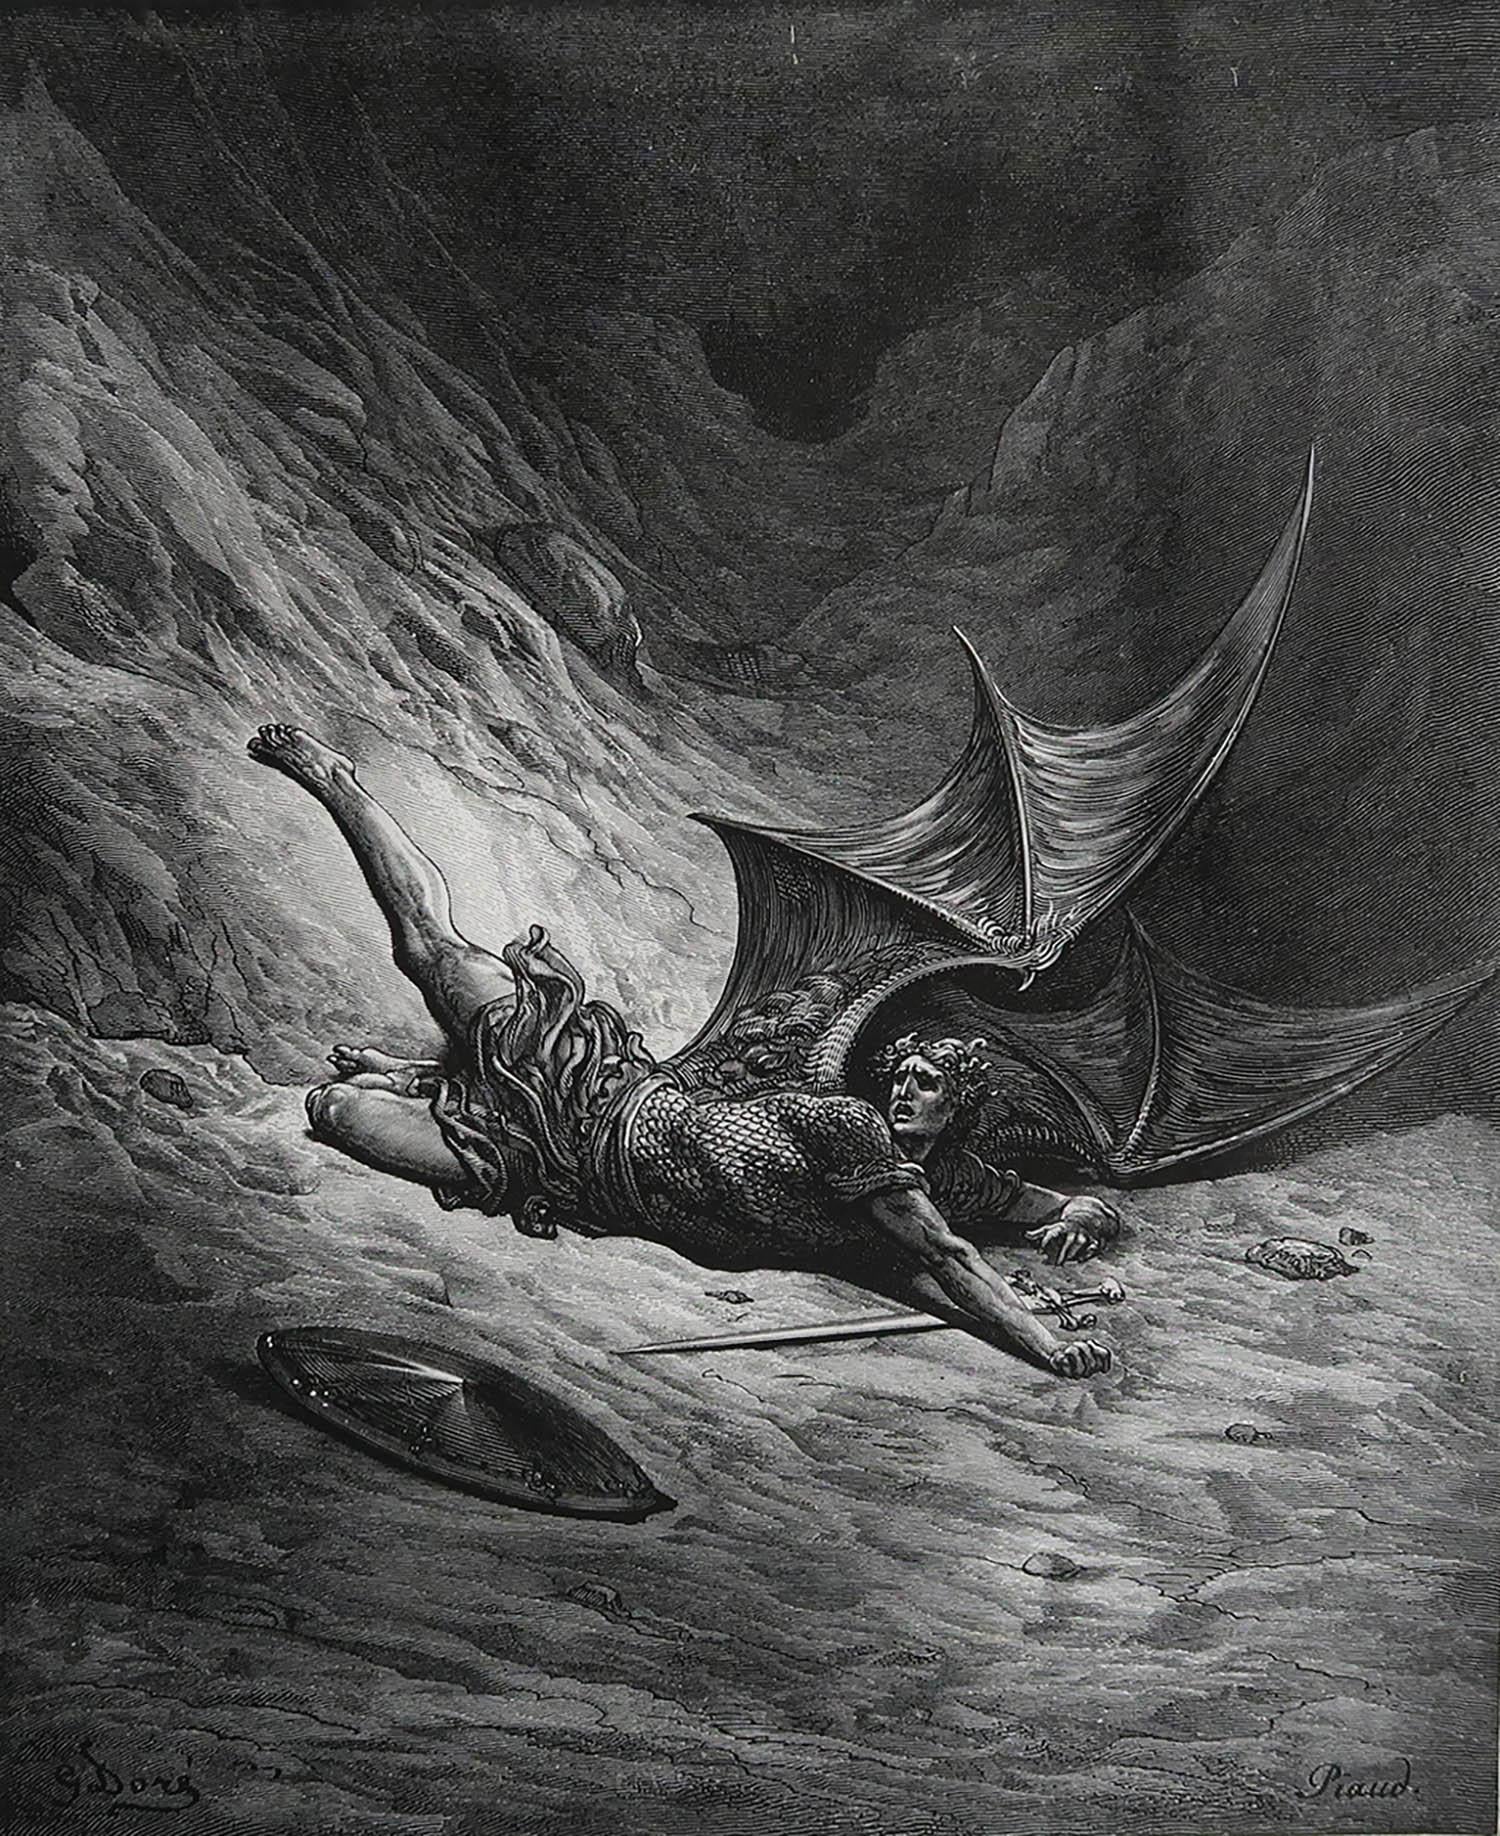 Sensational image by Gustave Dore

Originally an illustration for JohnMilton's 